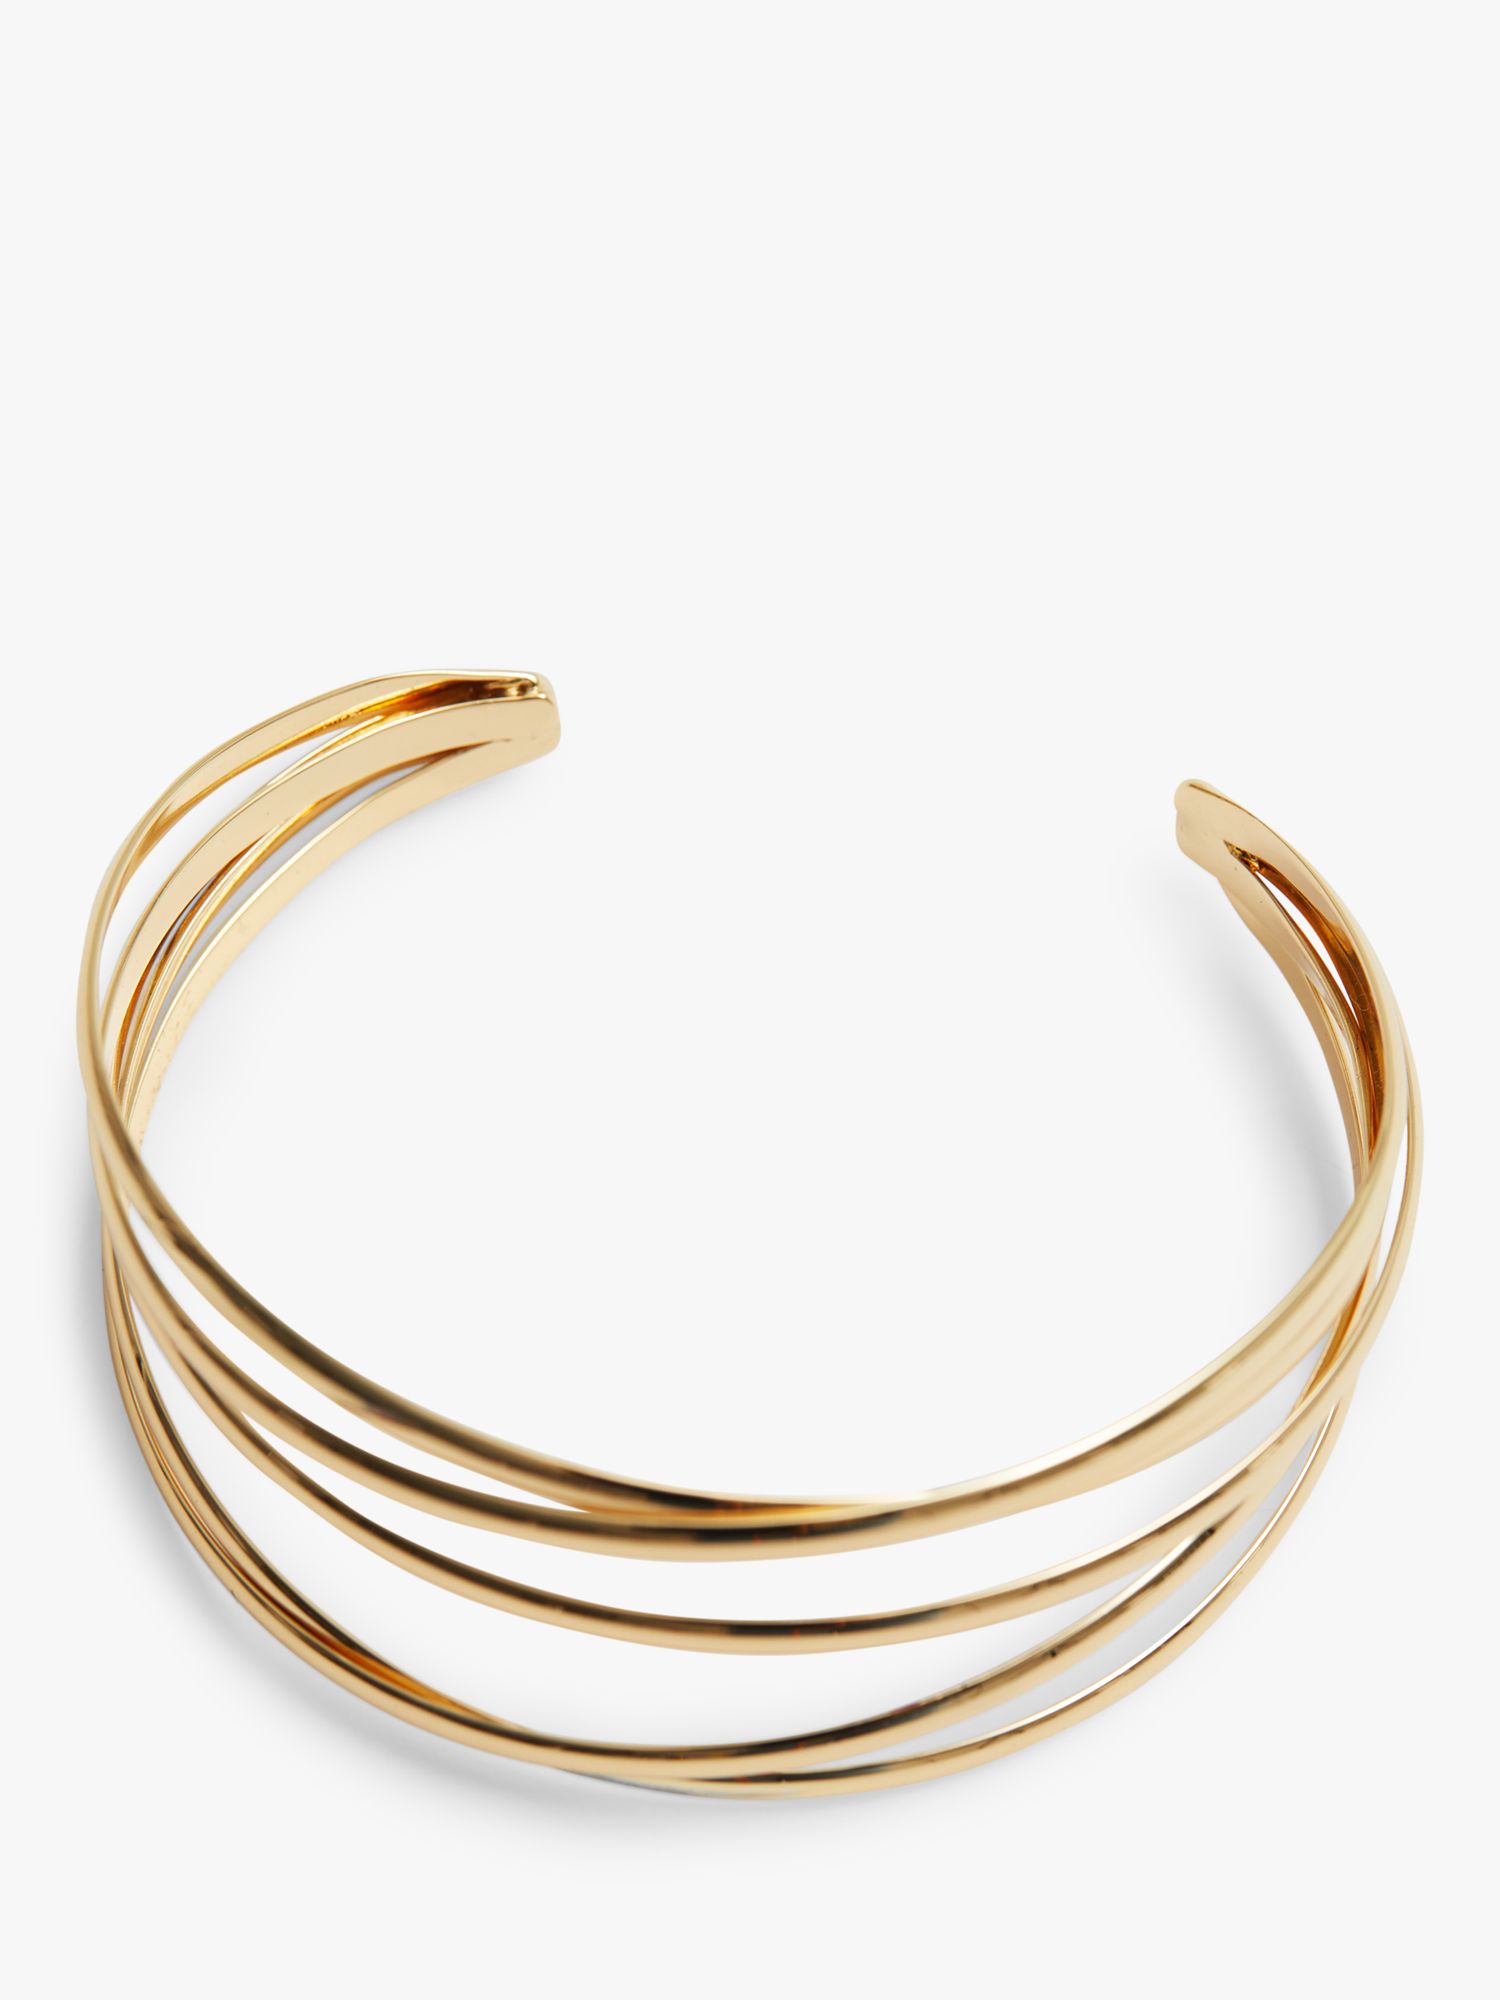 Buy Jon Richard Recycled Gold Plated Polished Weave Cuff Bangle, Gold Online at johnlewis.com